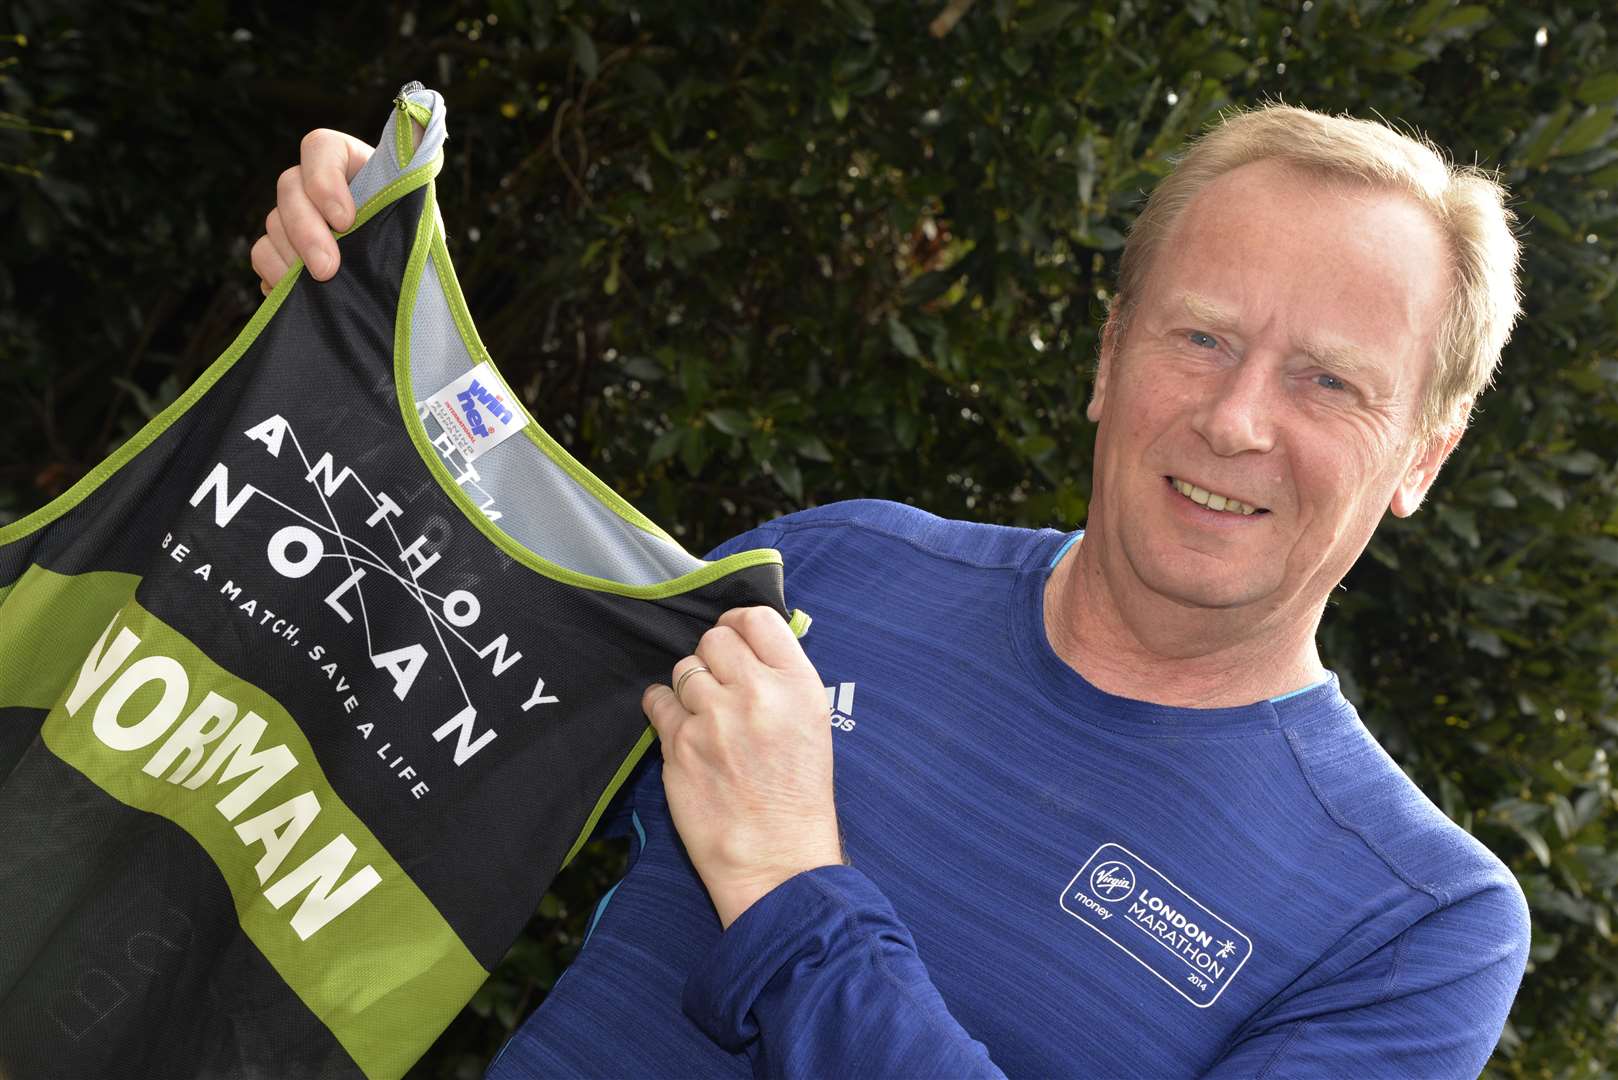 Norman Grimes is running his 12th marathon in London this year to raise money for Anthony Nolan, a blood cancer charity.